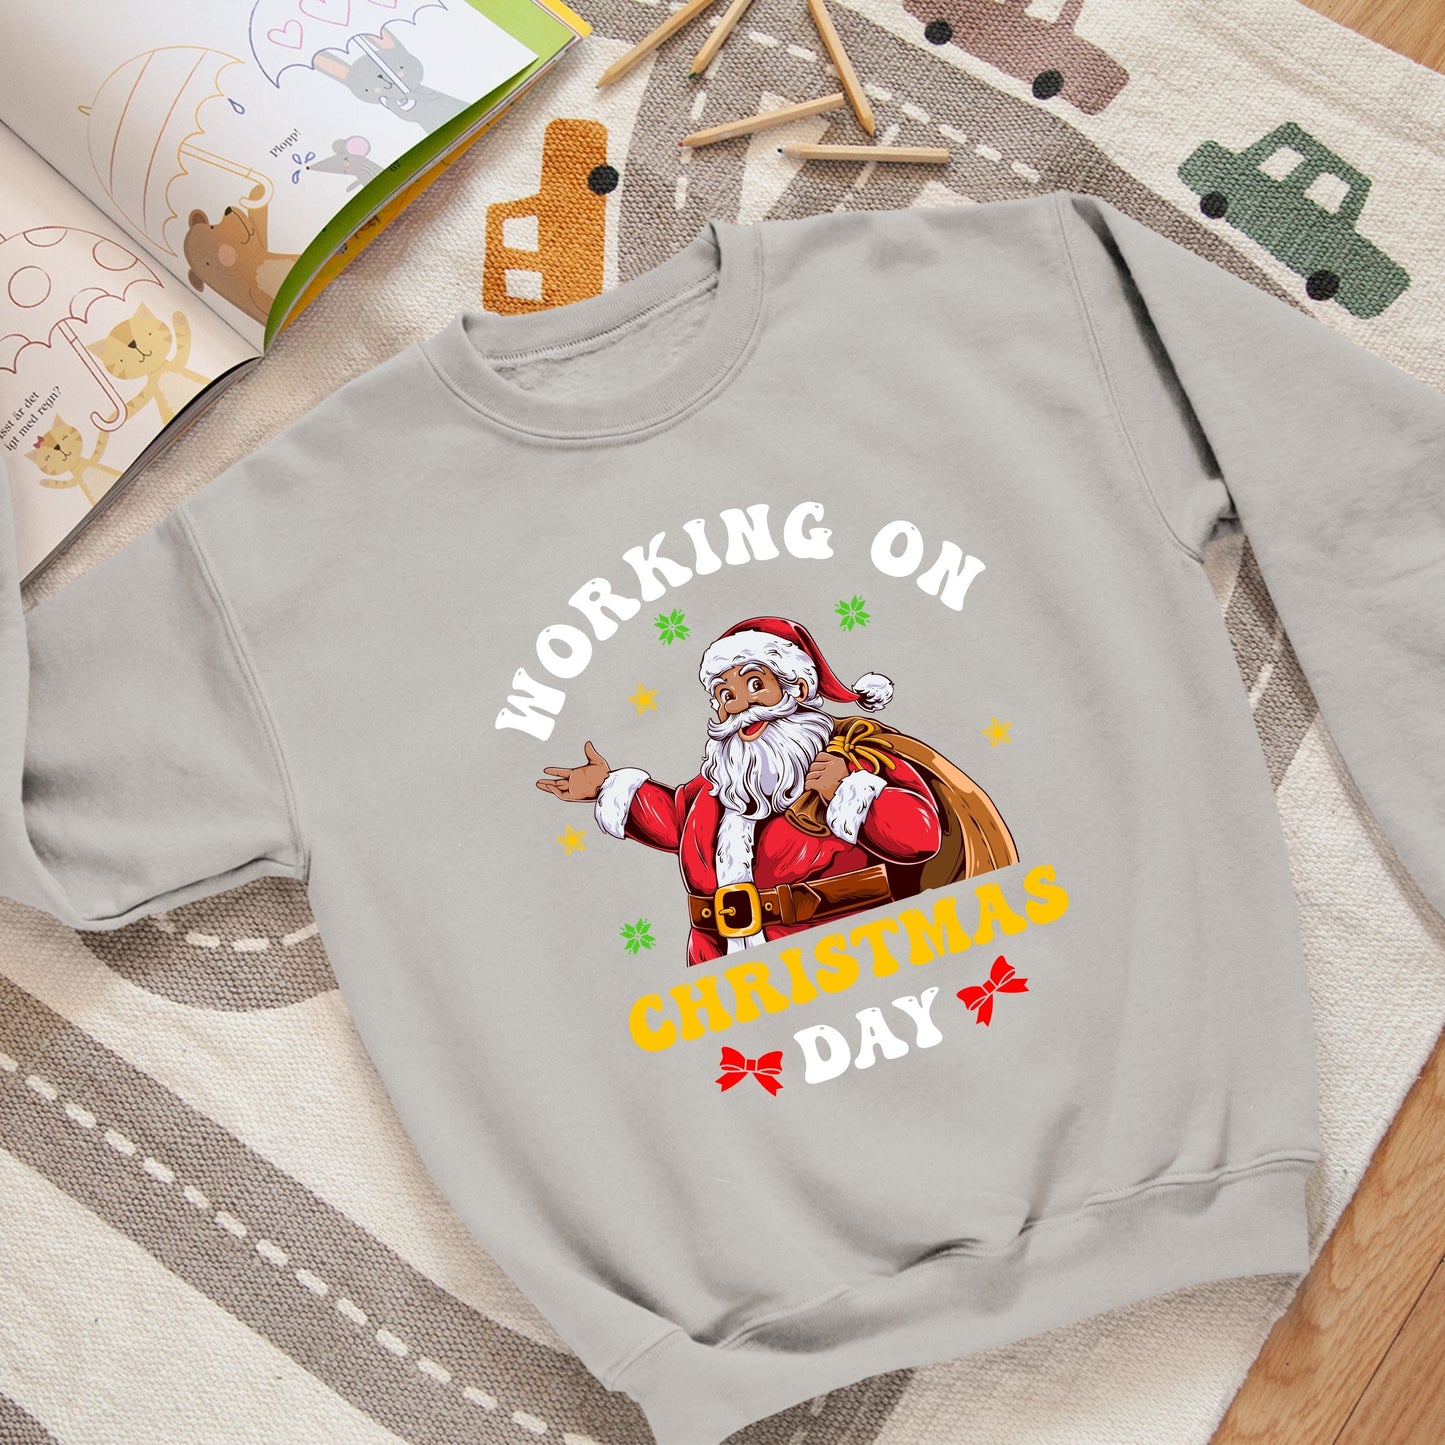 Working on Chirstmas, Youth Long Sleeve, Christmas Clothing, Christmas Sweatshirts, Christmas Shirts, Christmas Decor, Christmas